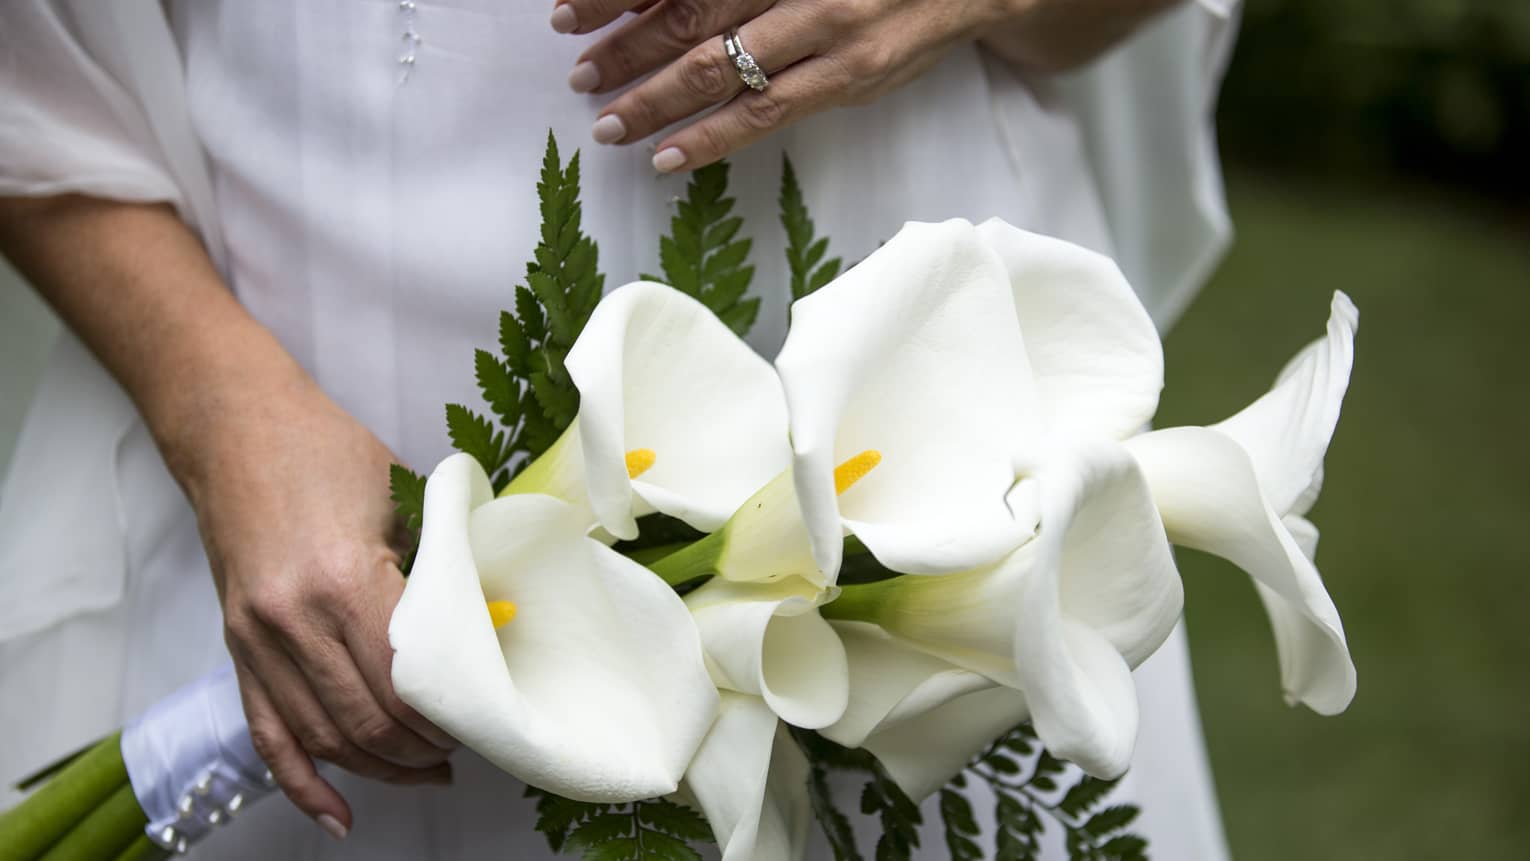 Woman holds bouquet with large white tropical flowers